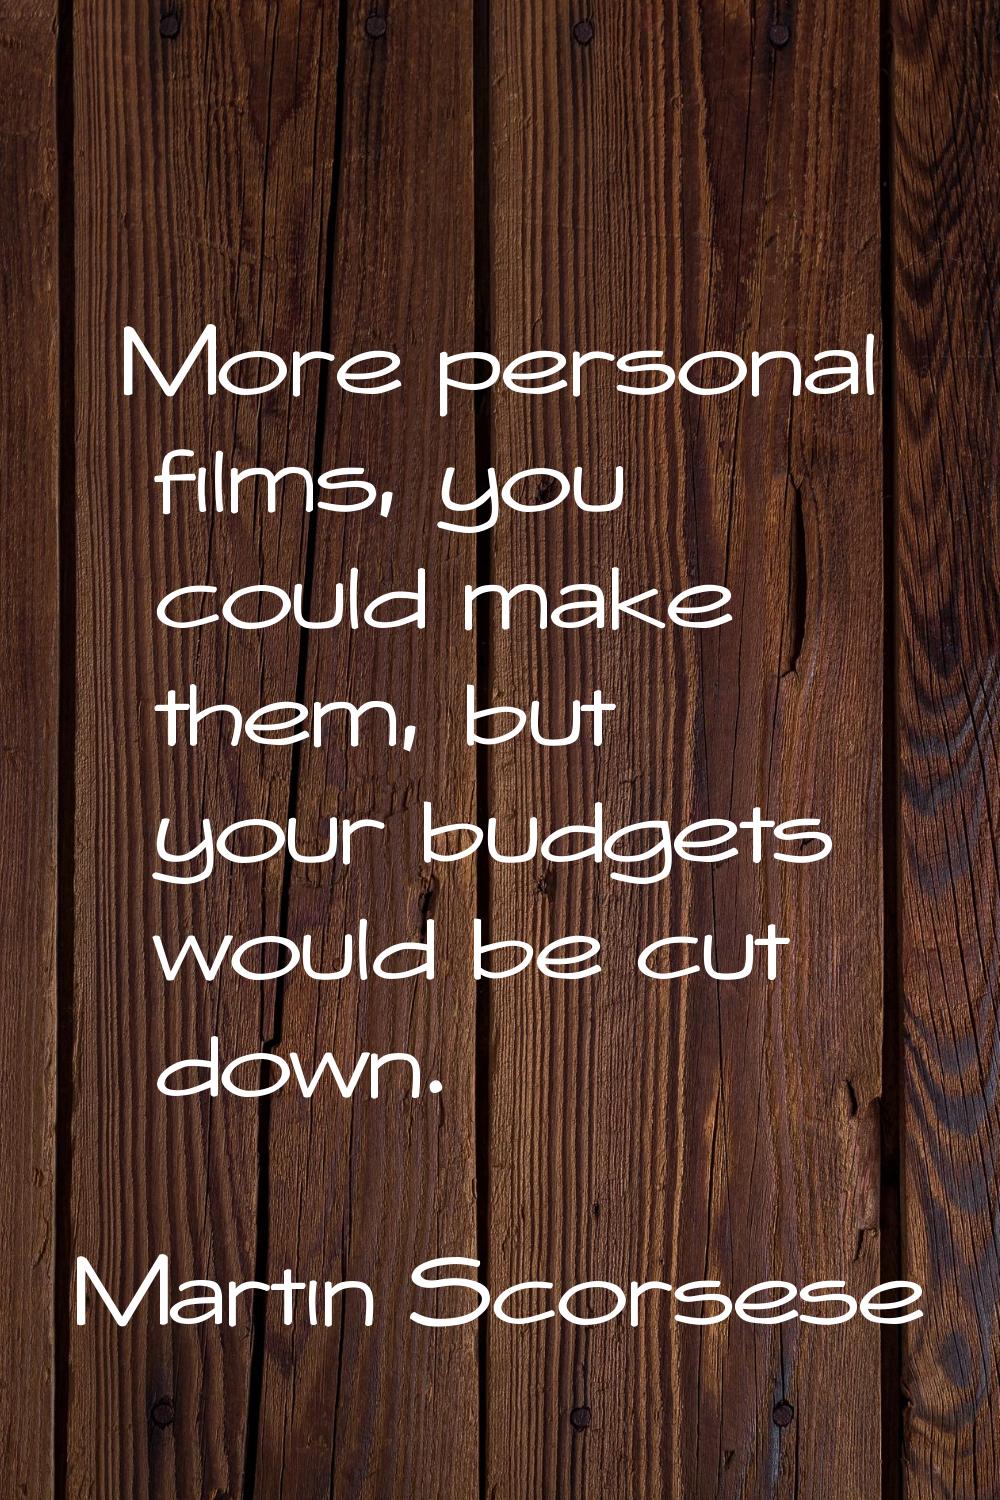 More personal films, you could make them, but your budgets would be cut down.